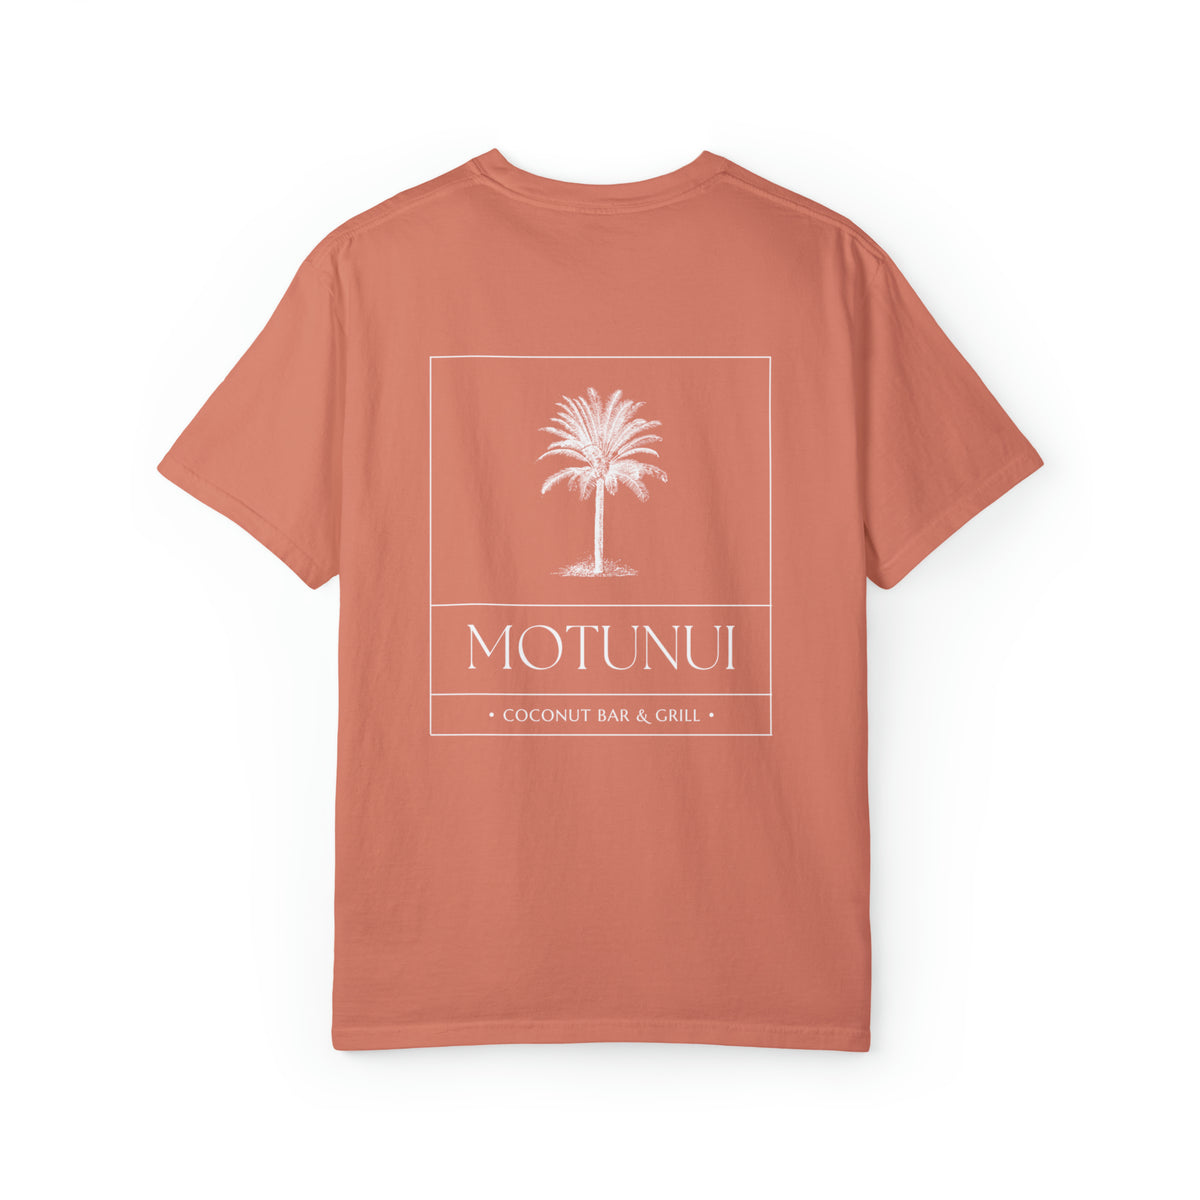 Motunui Coconut Bar and Grill Comfort Colors Unisex Garment-Dyed T-shirt